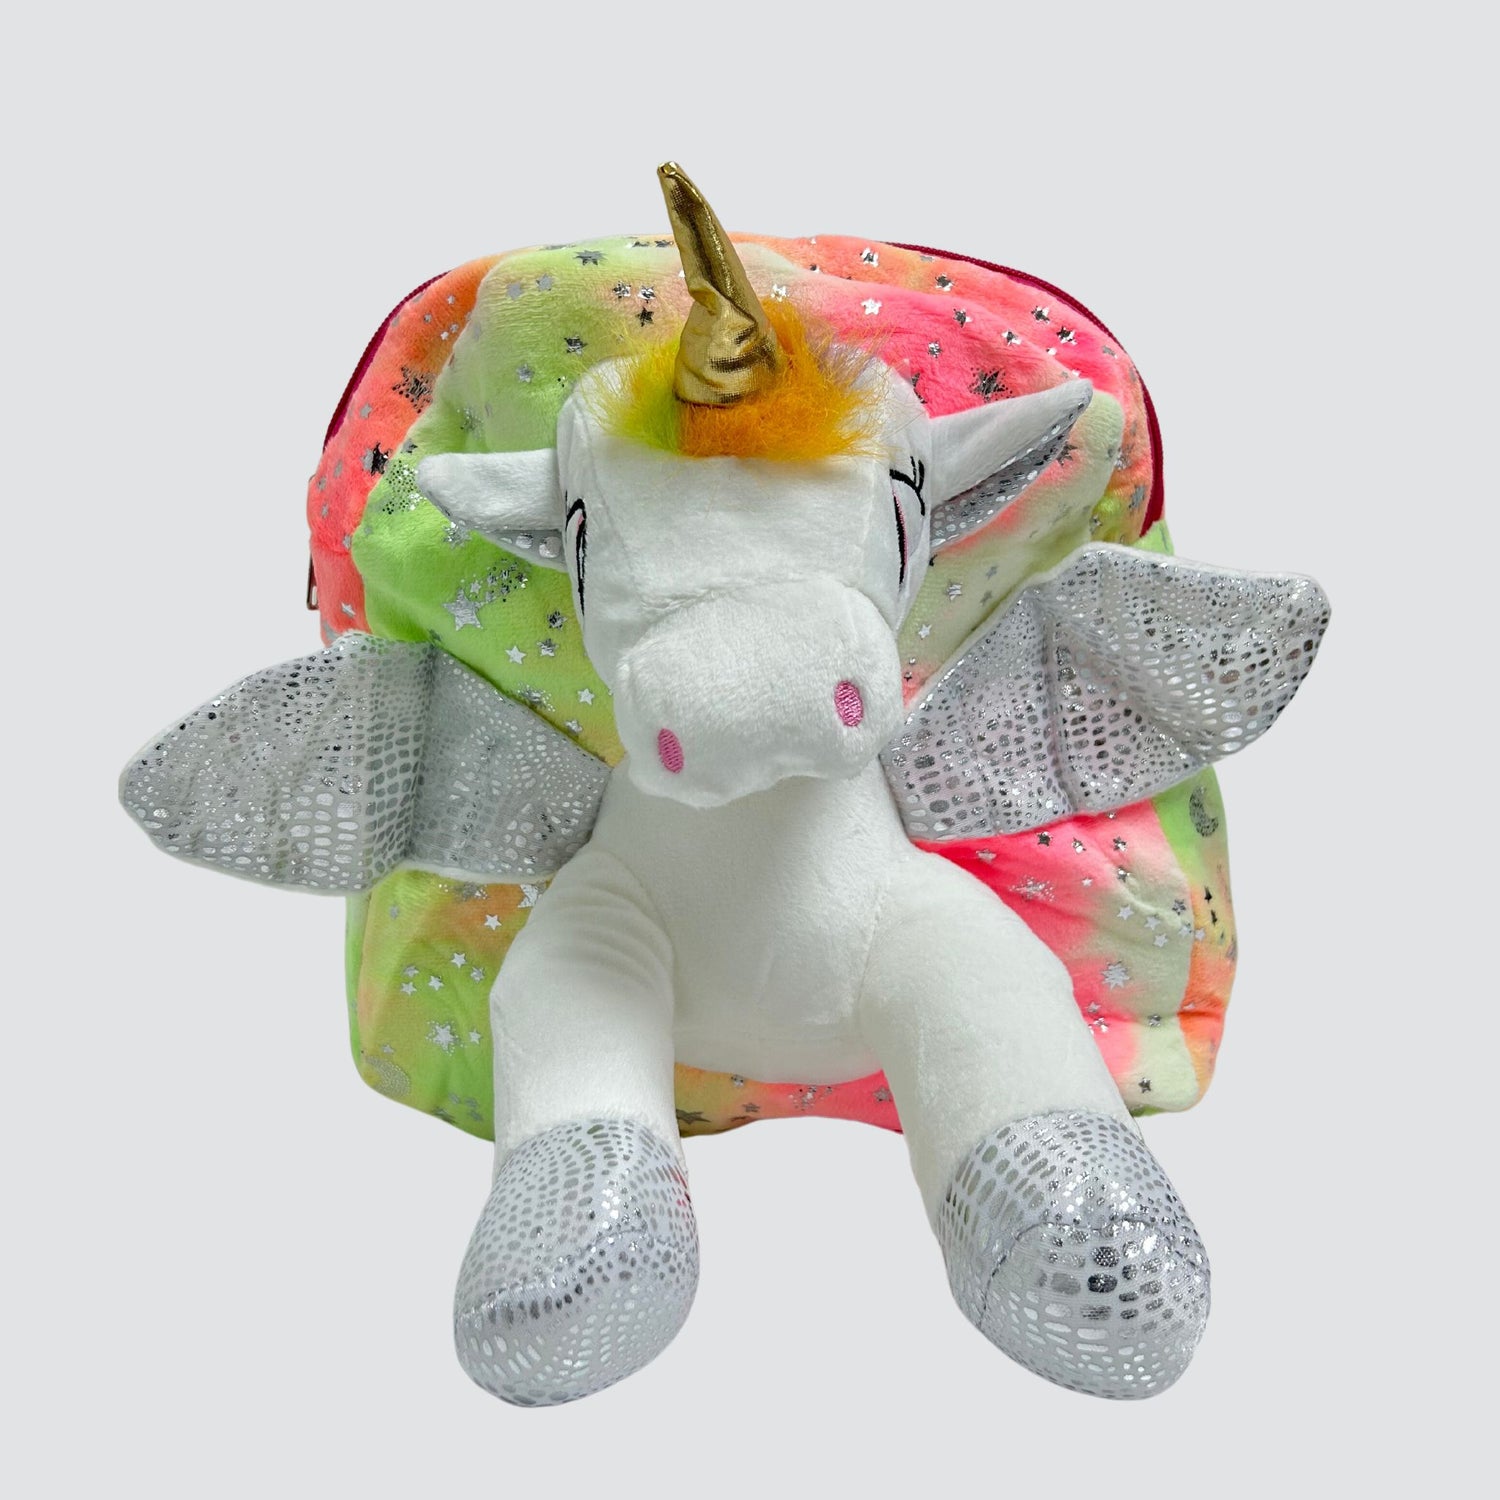 Multi Coloured Plush Unicorn Backpack with Silver Star Details